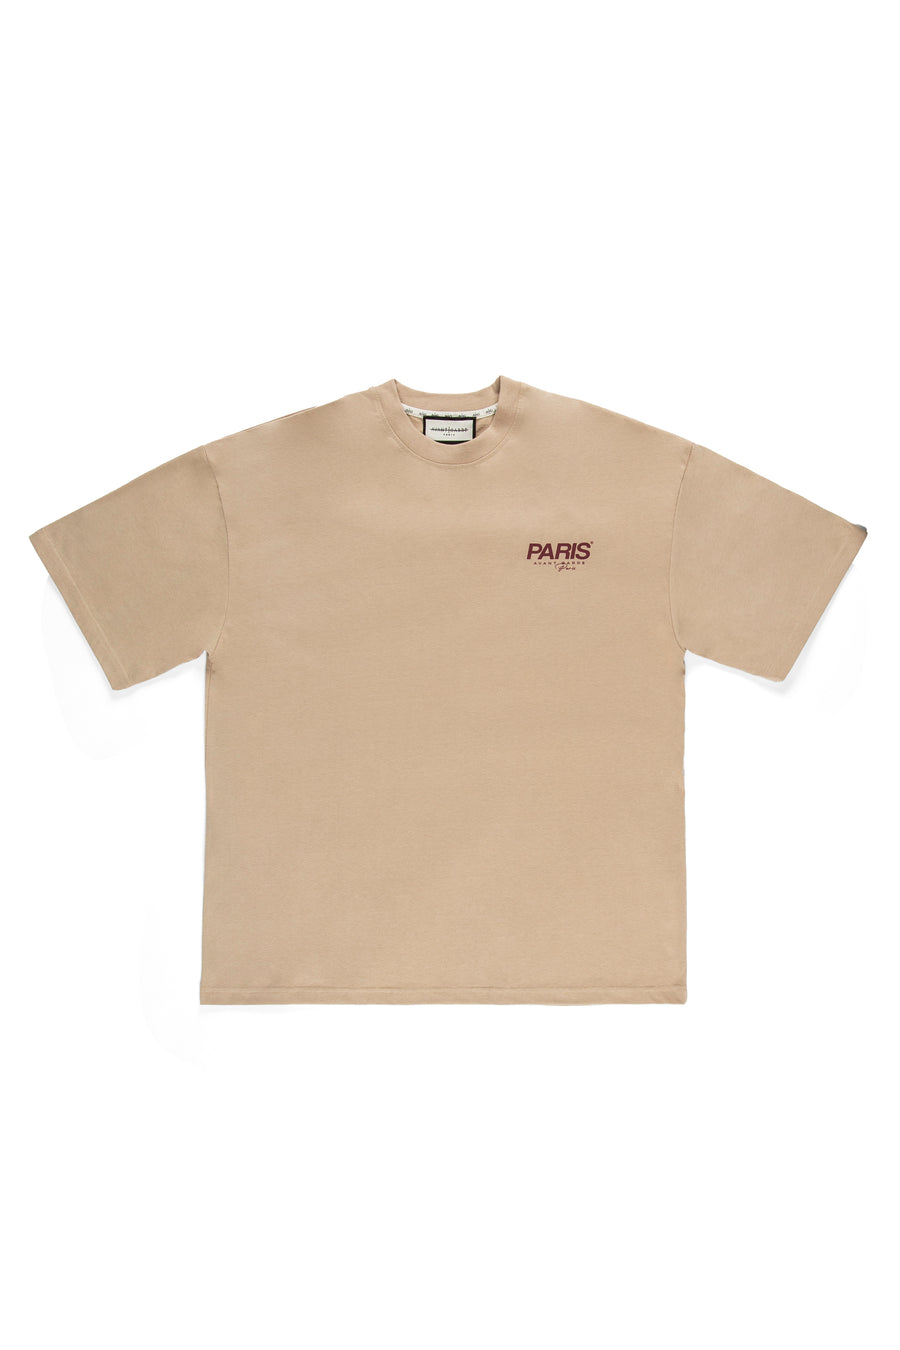 Parisien T-Shirt in Taupe